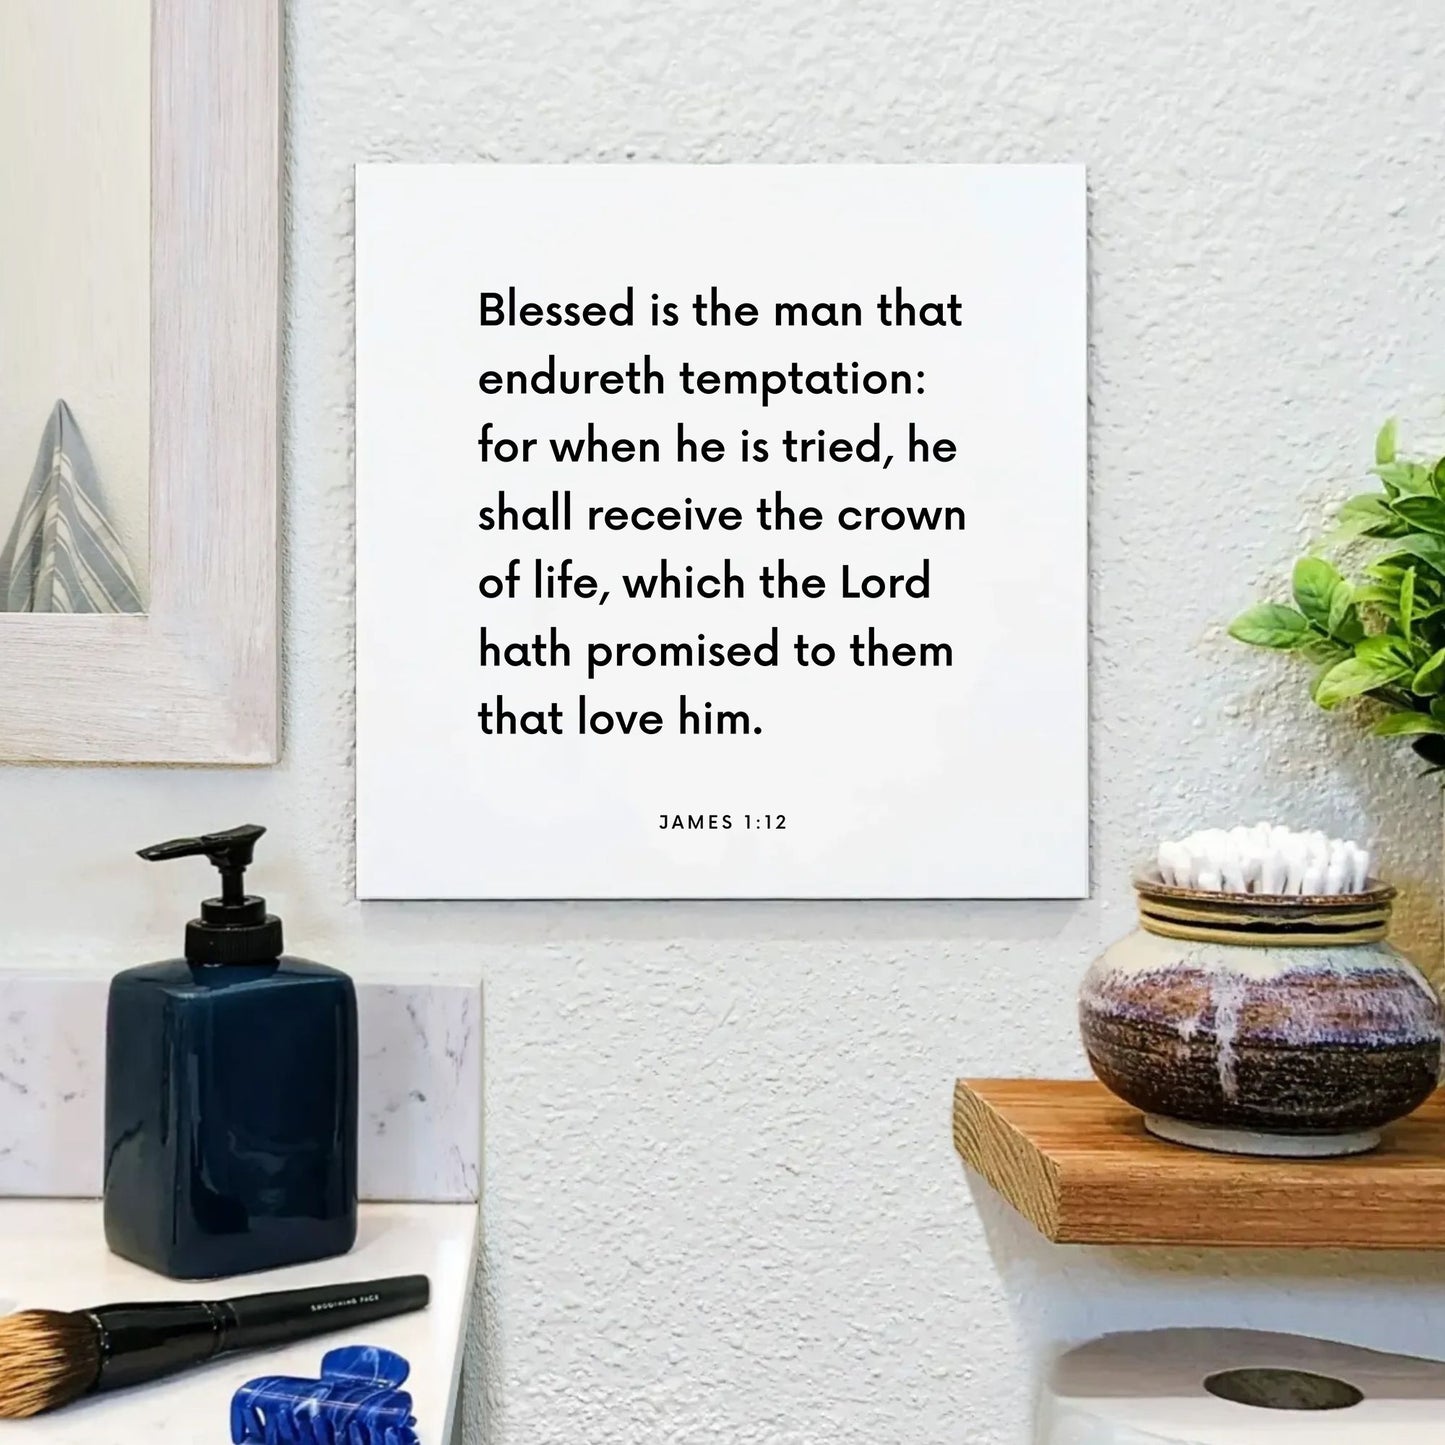 Bathroom mouting of the scripture tile for James 1:12 - "Blessed is the man that endureth temptation"